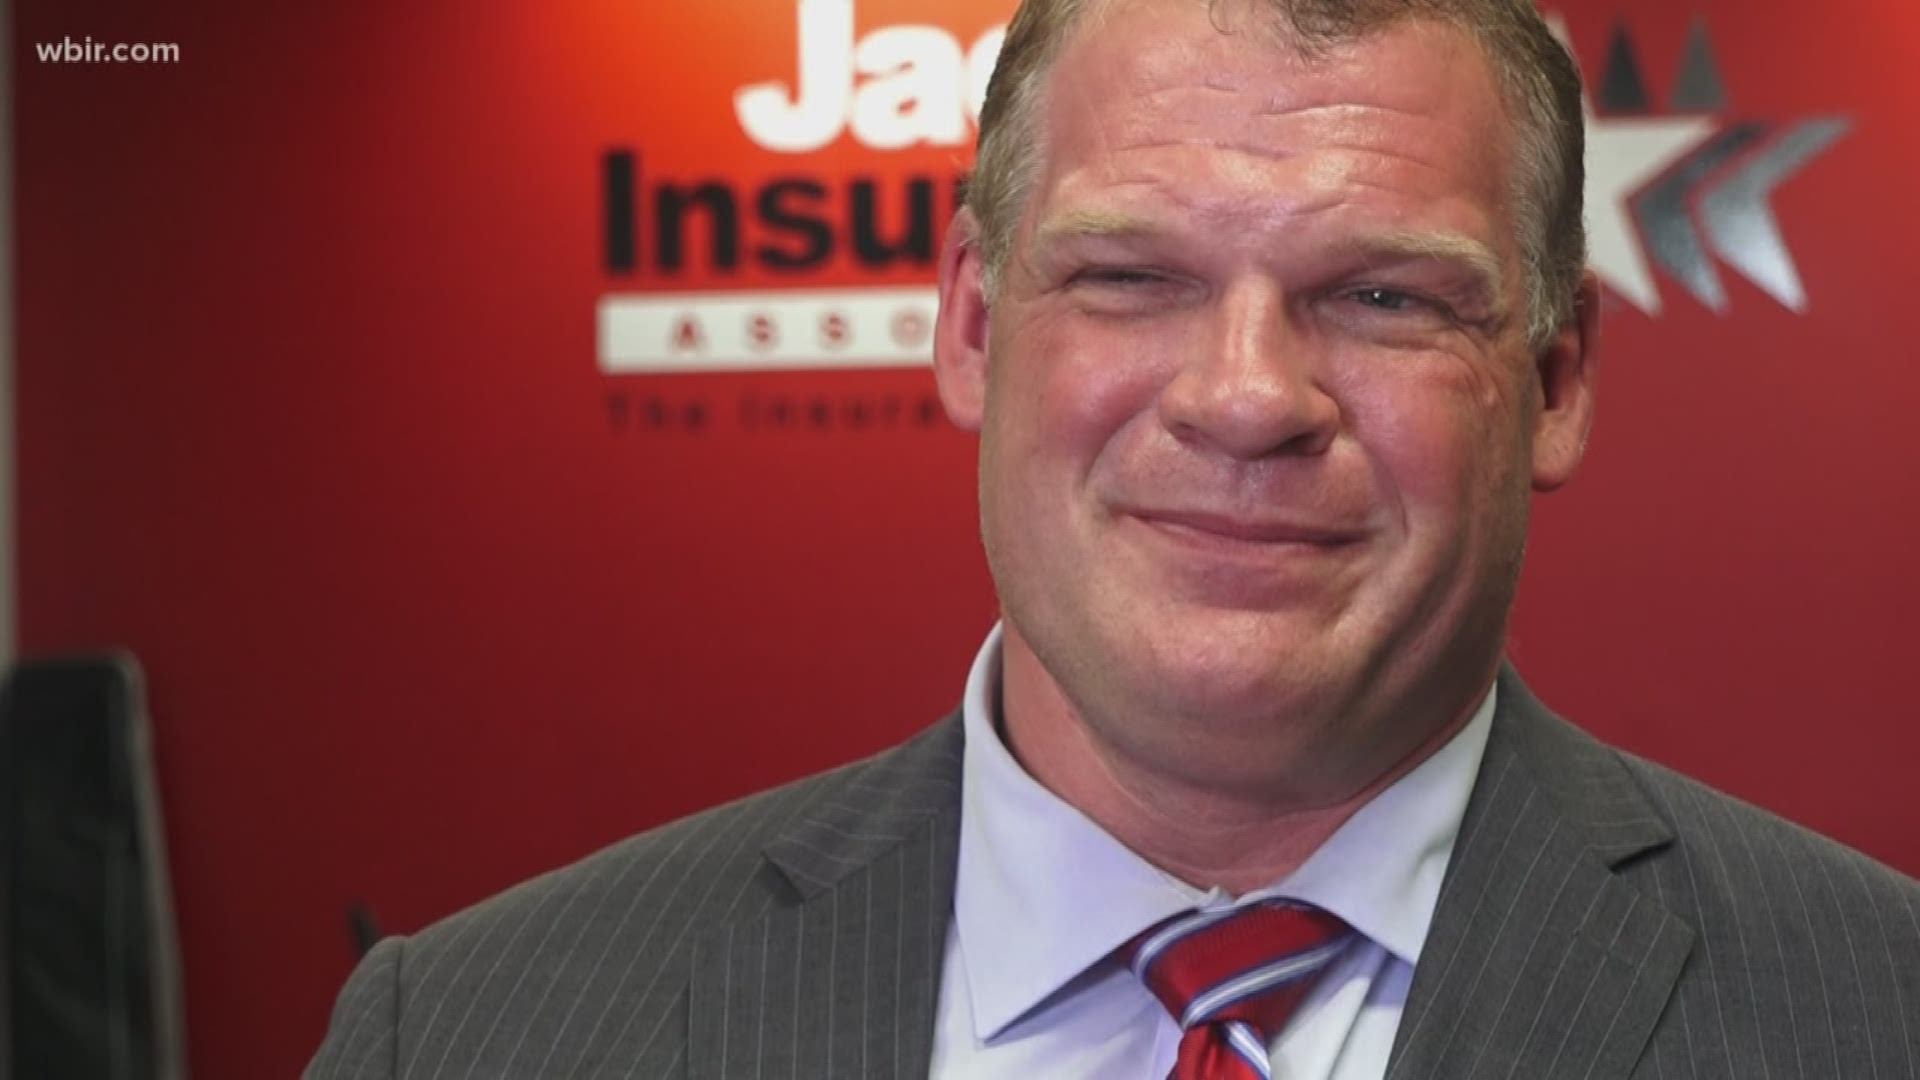 The internet is freaking out that the man known best as WWE wrestling legend 'Kane' will be Knox County's mayor, but Jacobs is taking all this in stride -- saying the spotlight can only help the county.